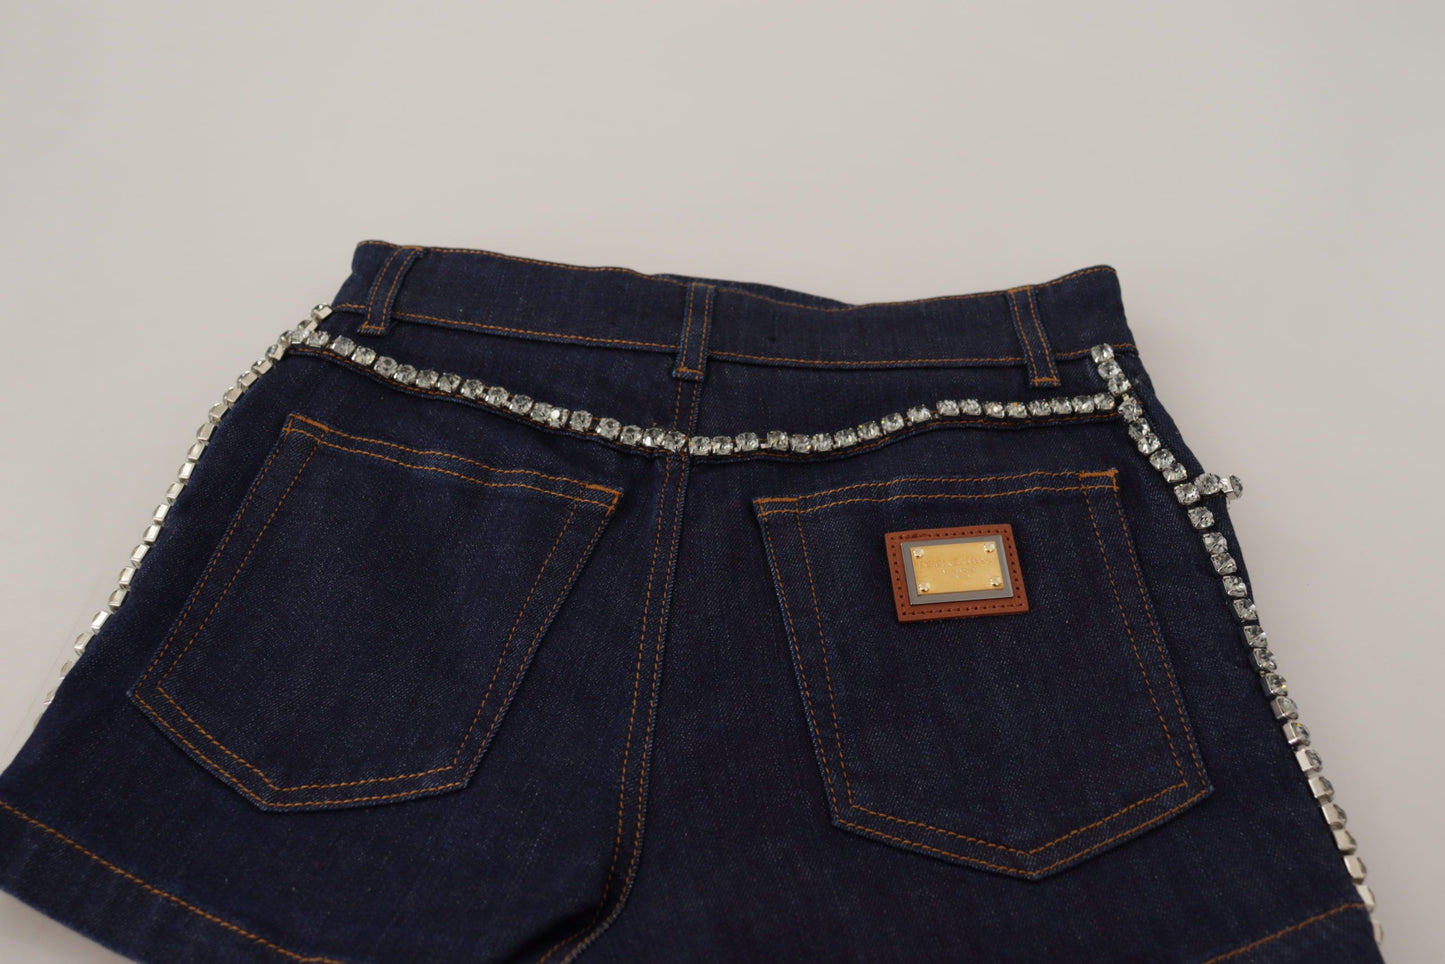 Dolce & Gabbana Chic High Waist Hot Pants Shorts with Crystal Detailing